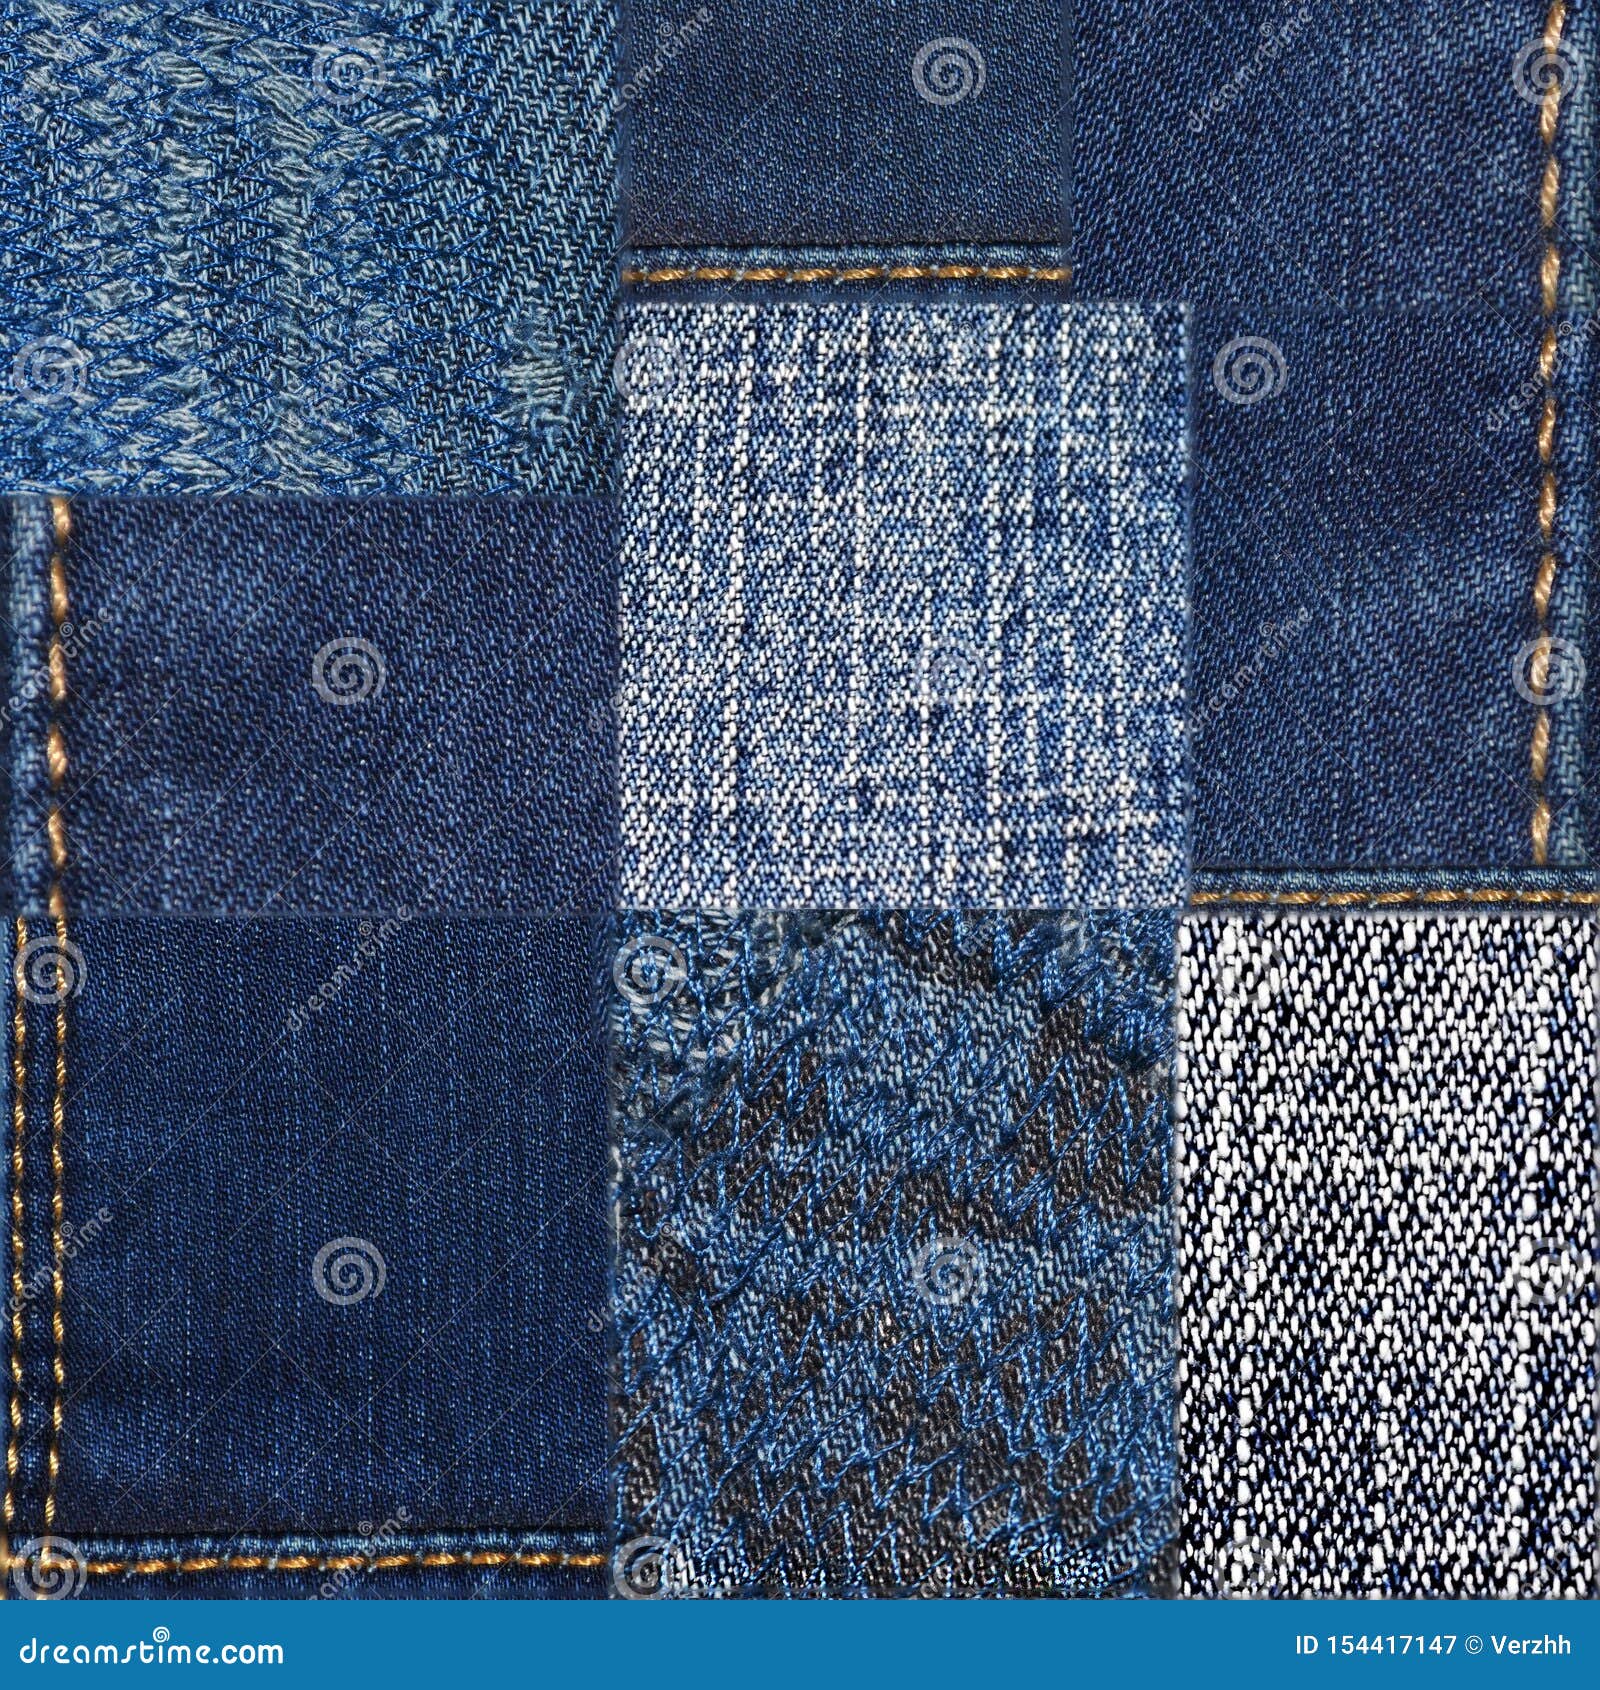 Background with Denim Texture Fabric 2 Stock Image - Image of pattern ...